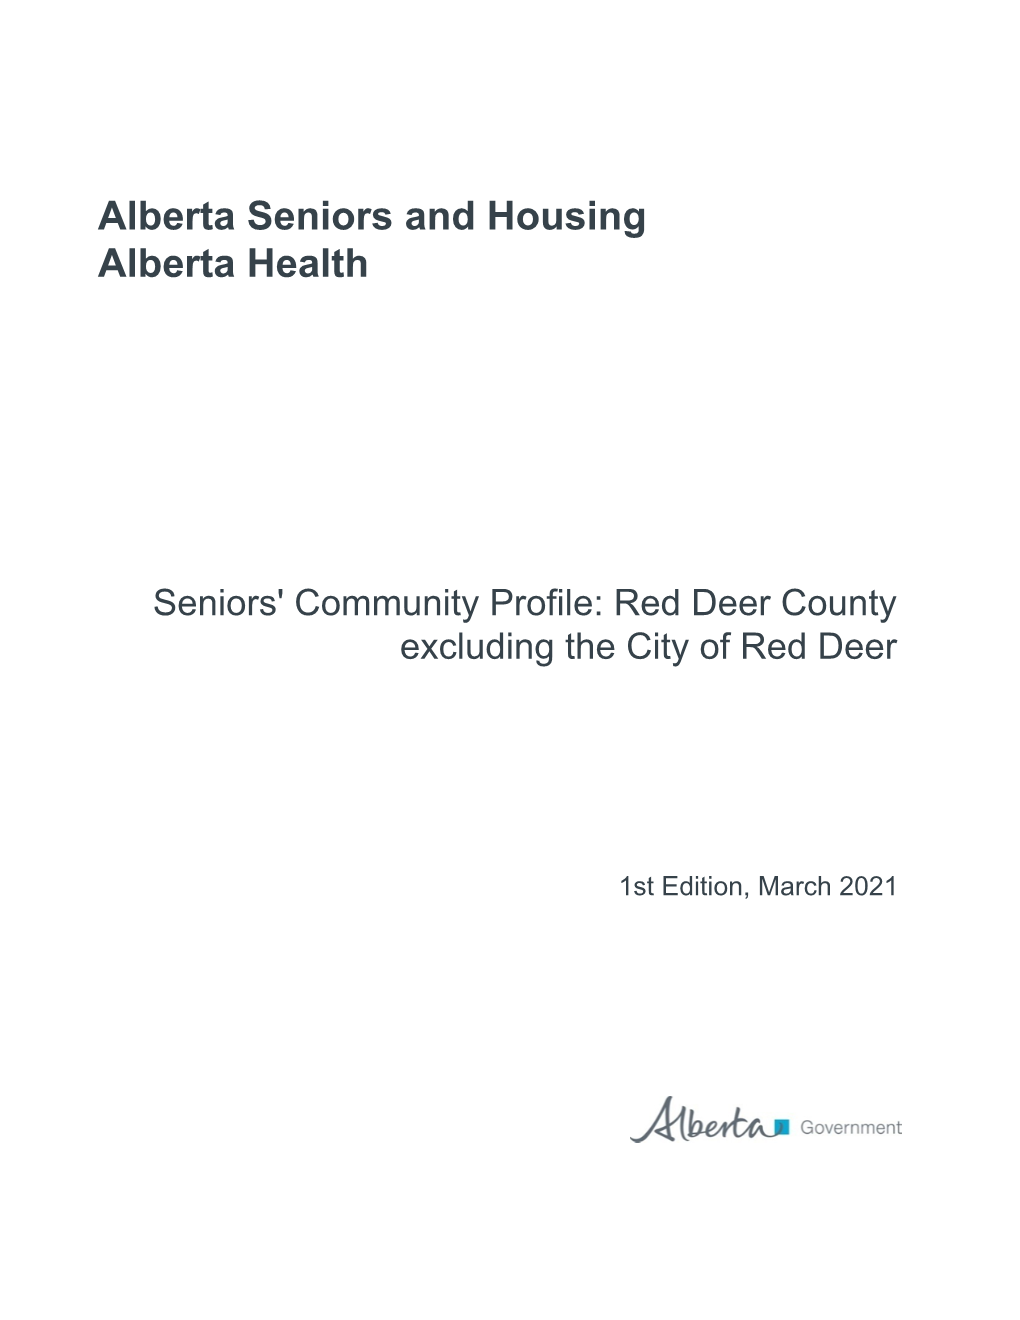 Seniors' Community Profile: Red Deer County Excluding the City of Red Deer